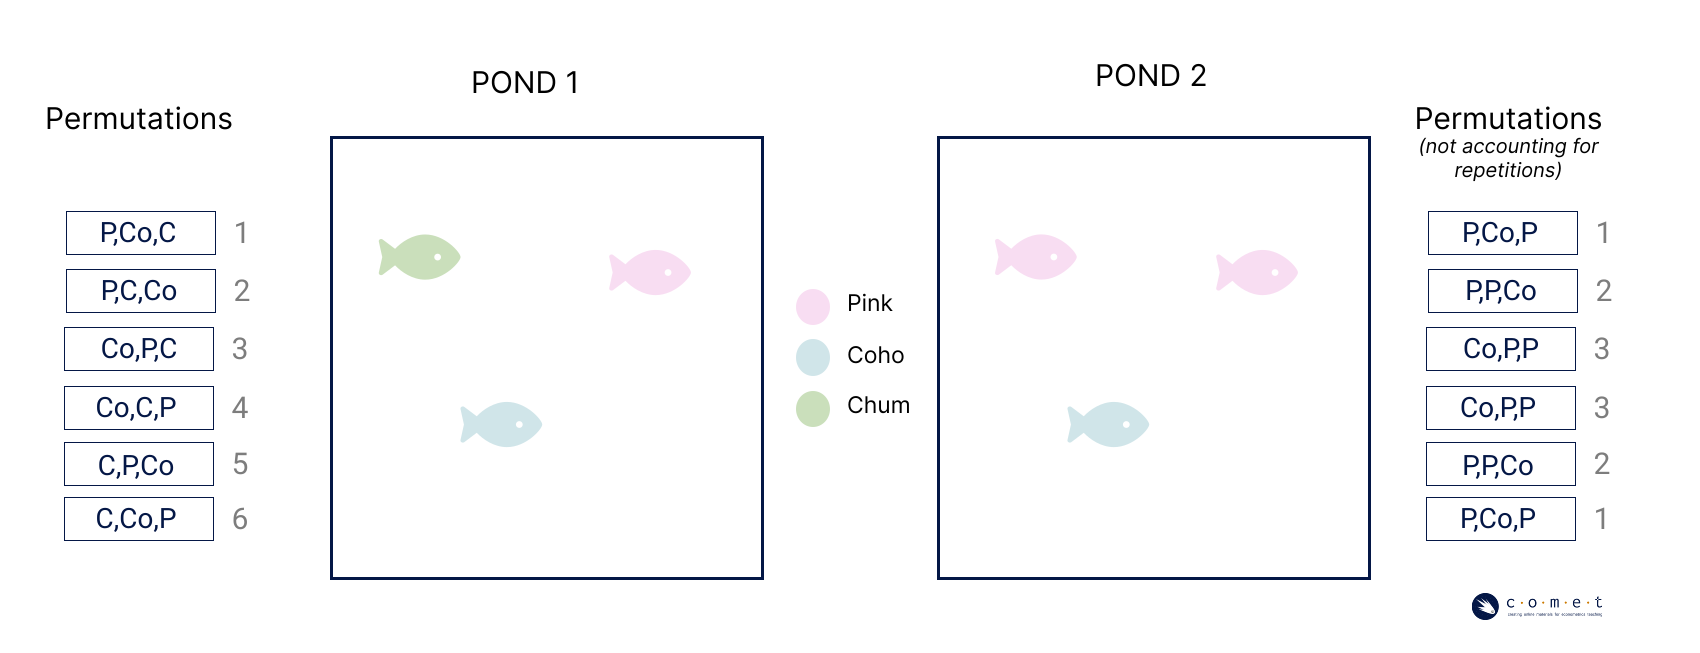 A visualisation showing how the number of permutations was is reduced when a repeat of the element (two of the same salmon species) are introduced